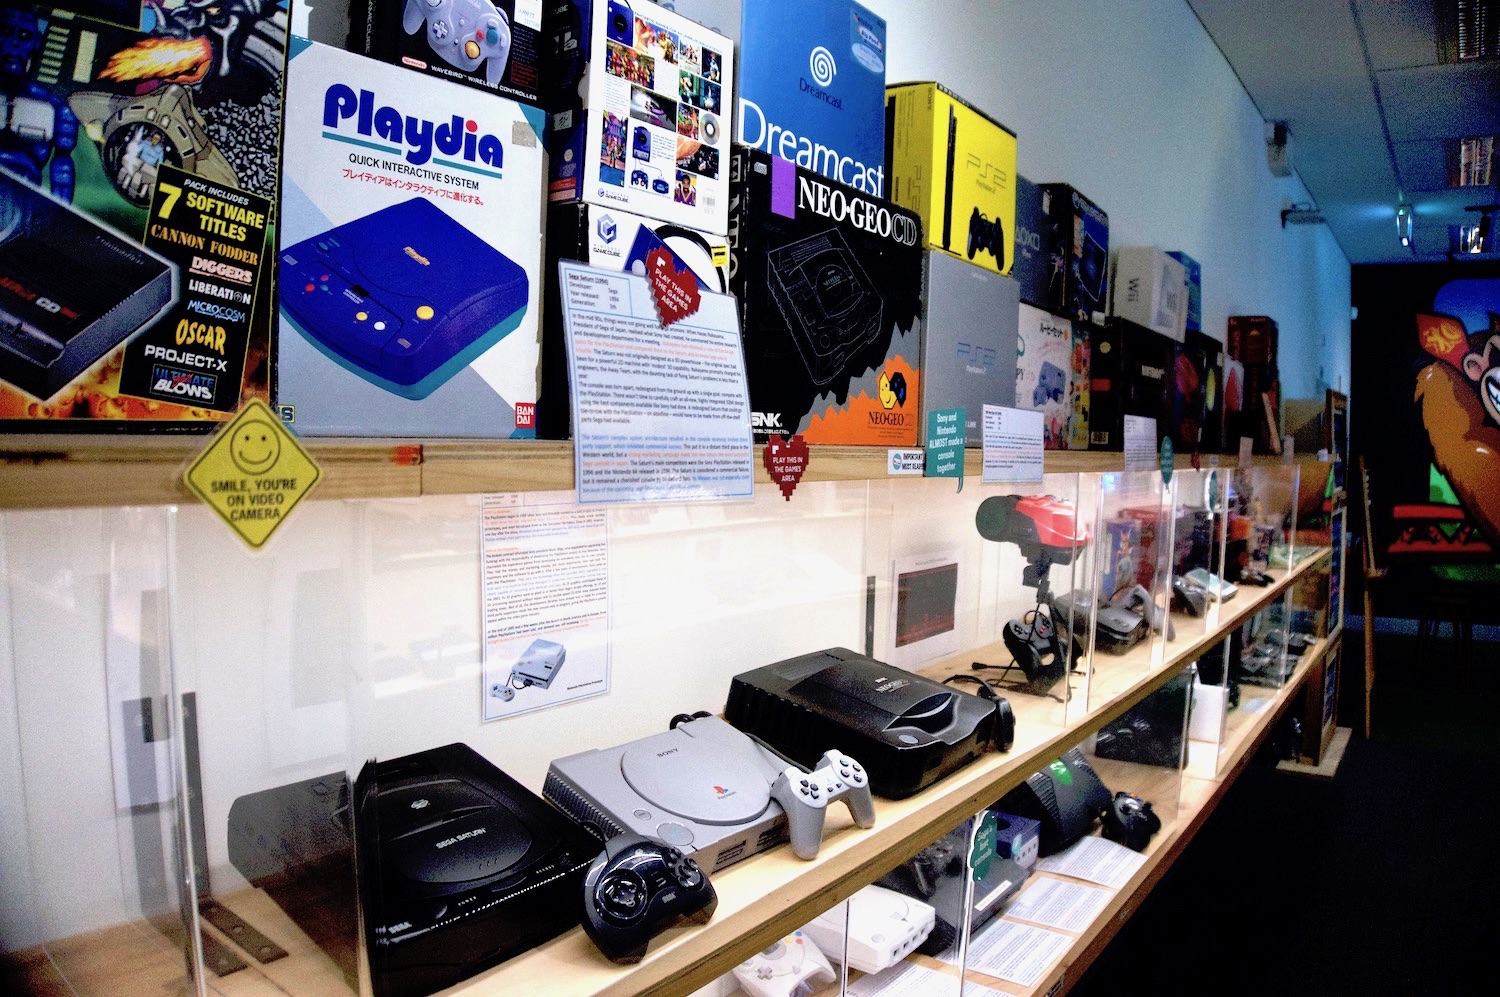 Photo from The Nostalgia Box museum, showing boxes for the Playdia and Dreamcast, among others, as well as the Saturn, PS1, and other consoles.